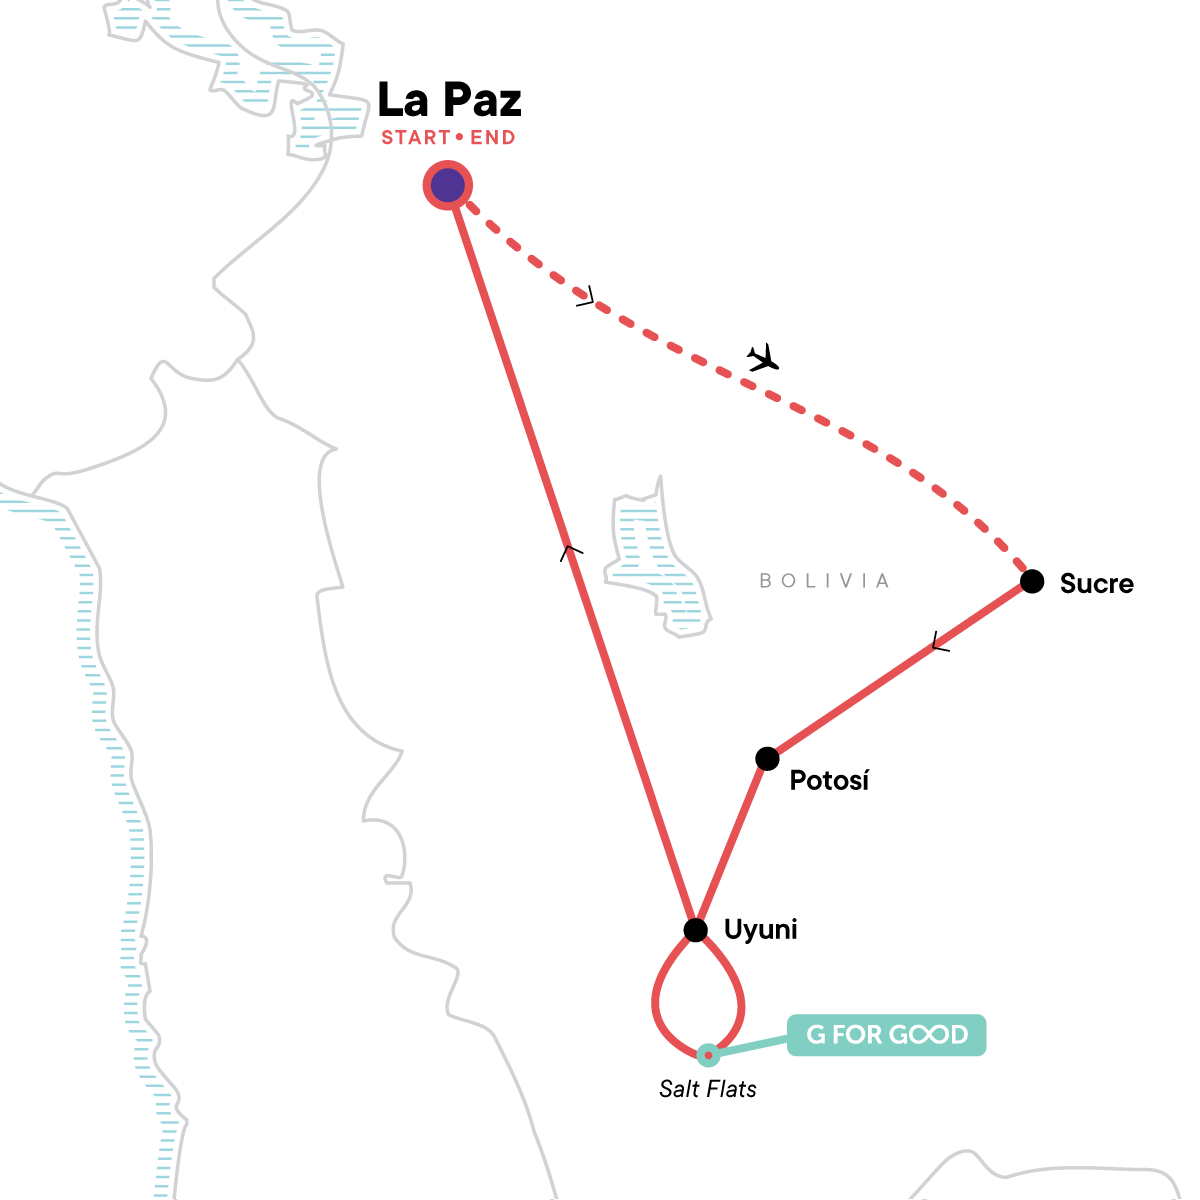 A map of the tour begins in La Paz, with a flight to Sucre. The next stops to the southwest are Potosí, Uyuni, and the Salt Flats, where there is a 